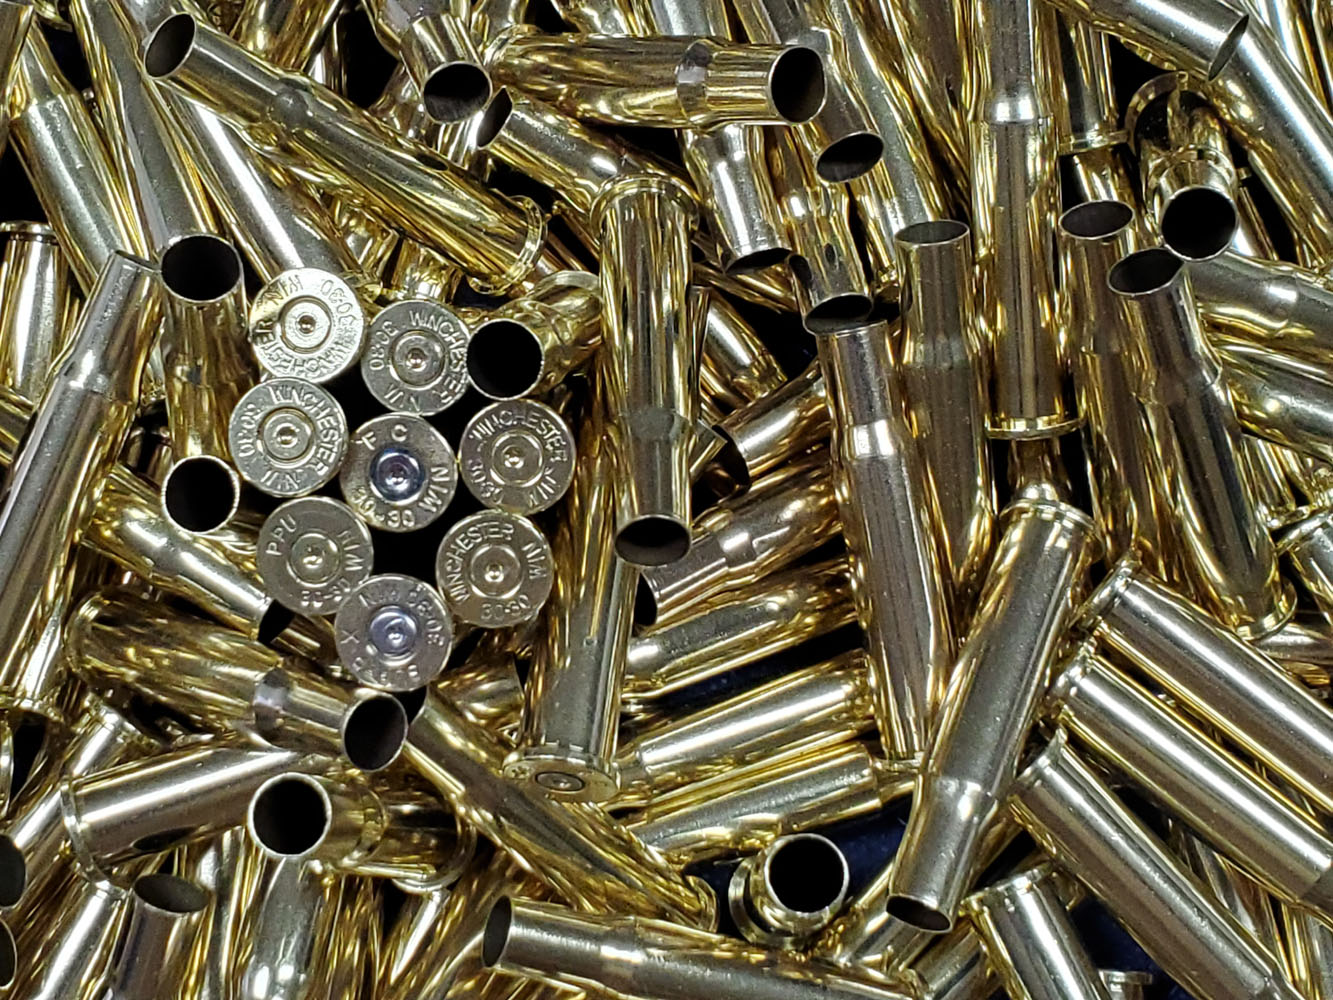 6.5 Creedmoor Once Fired Brass, Mixed Head Stamps 125 Count - Once Fired  Brass, Gun Parts